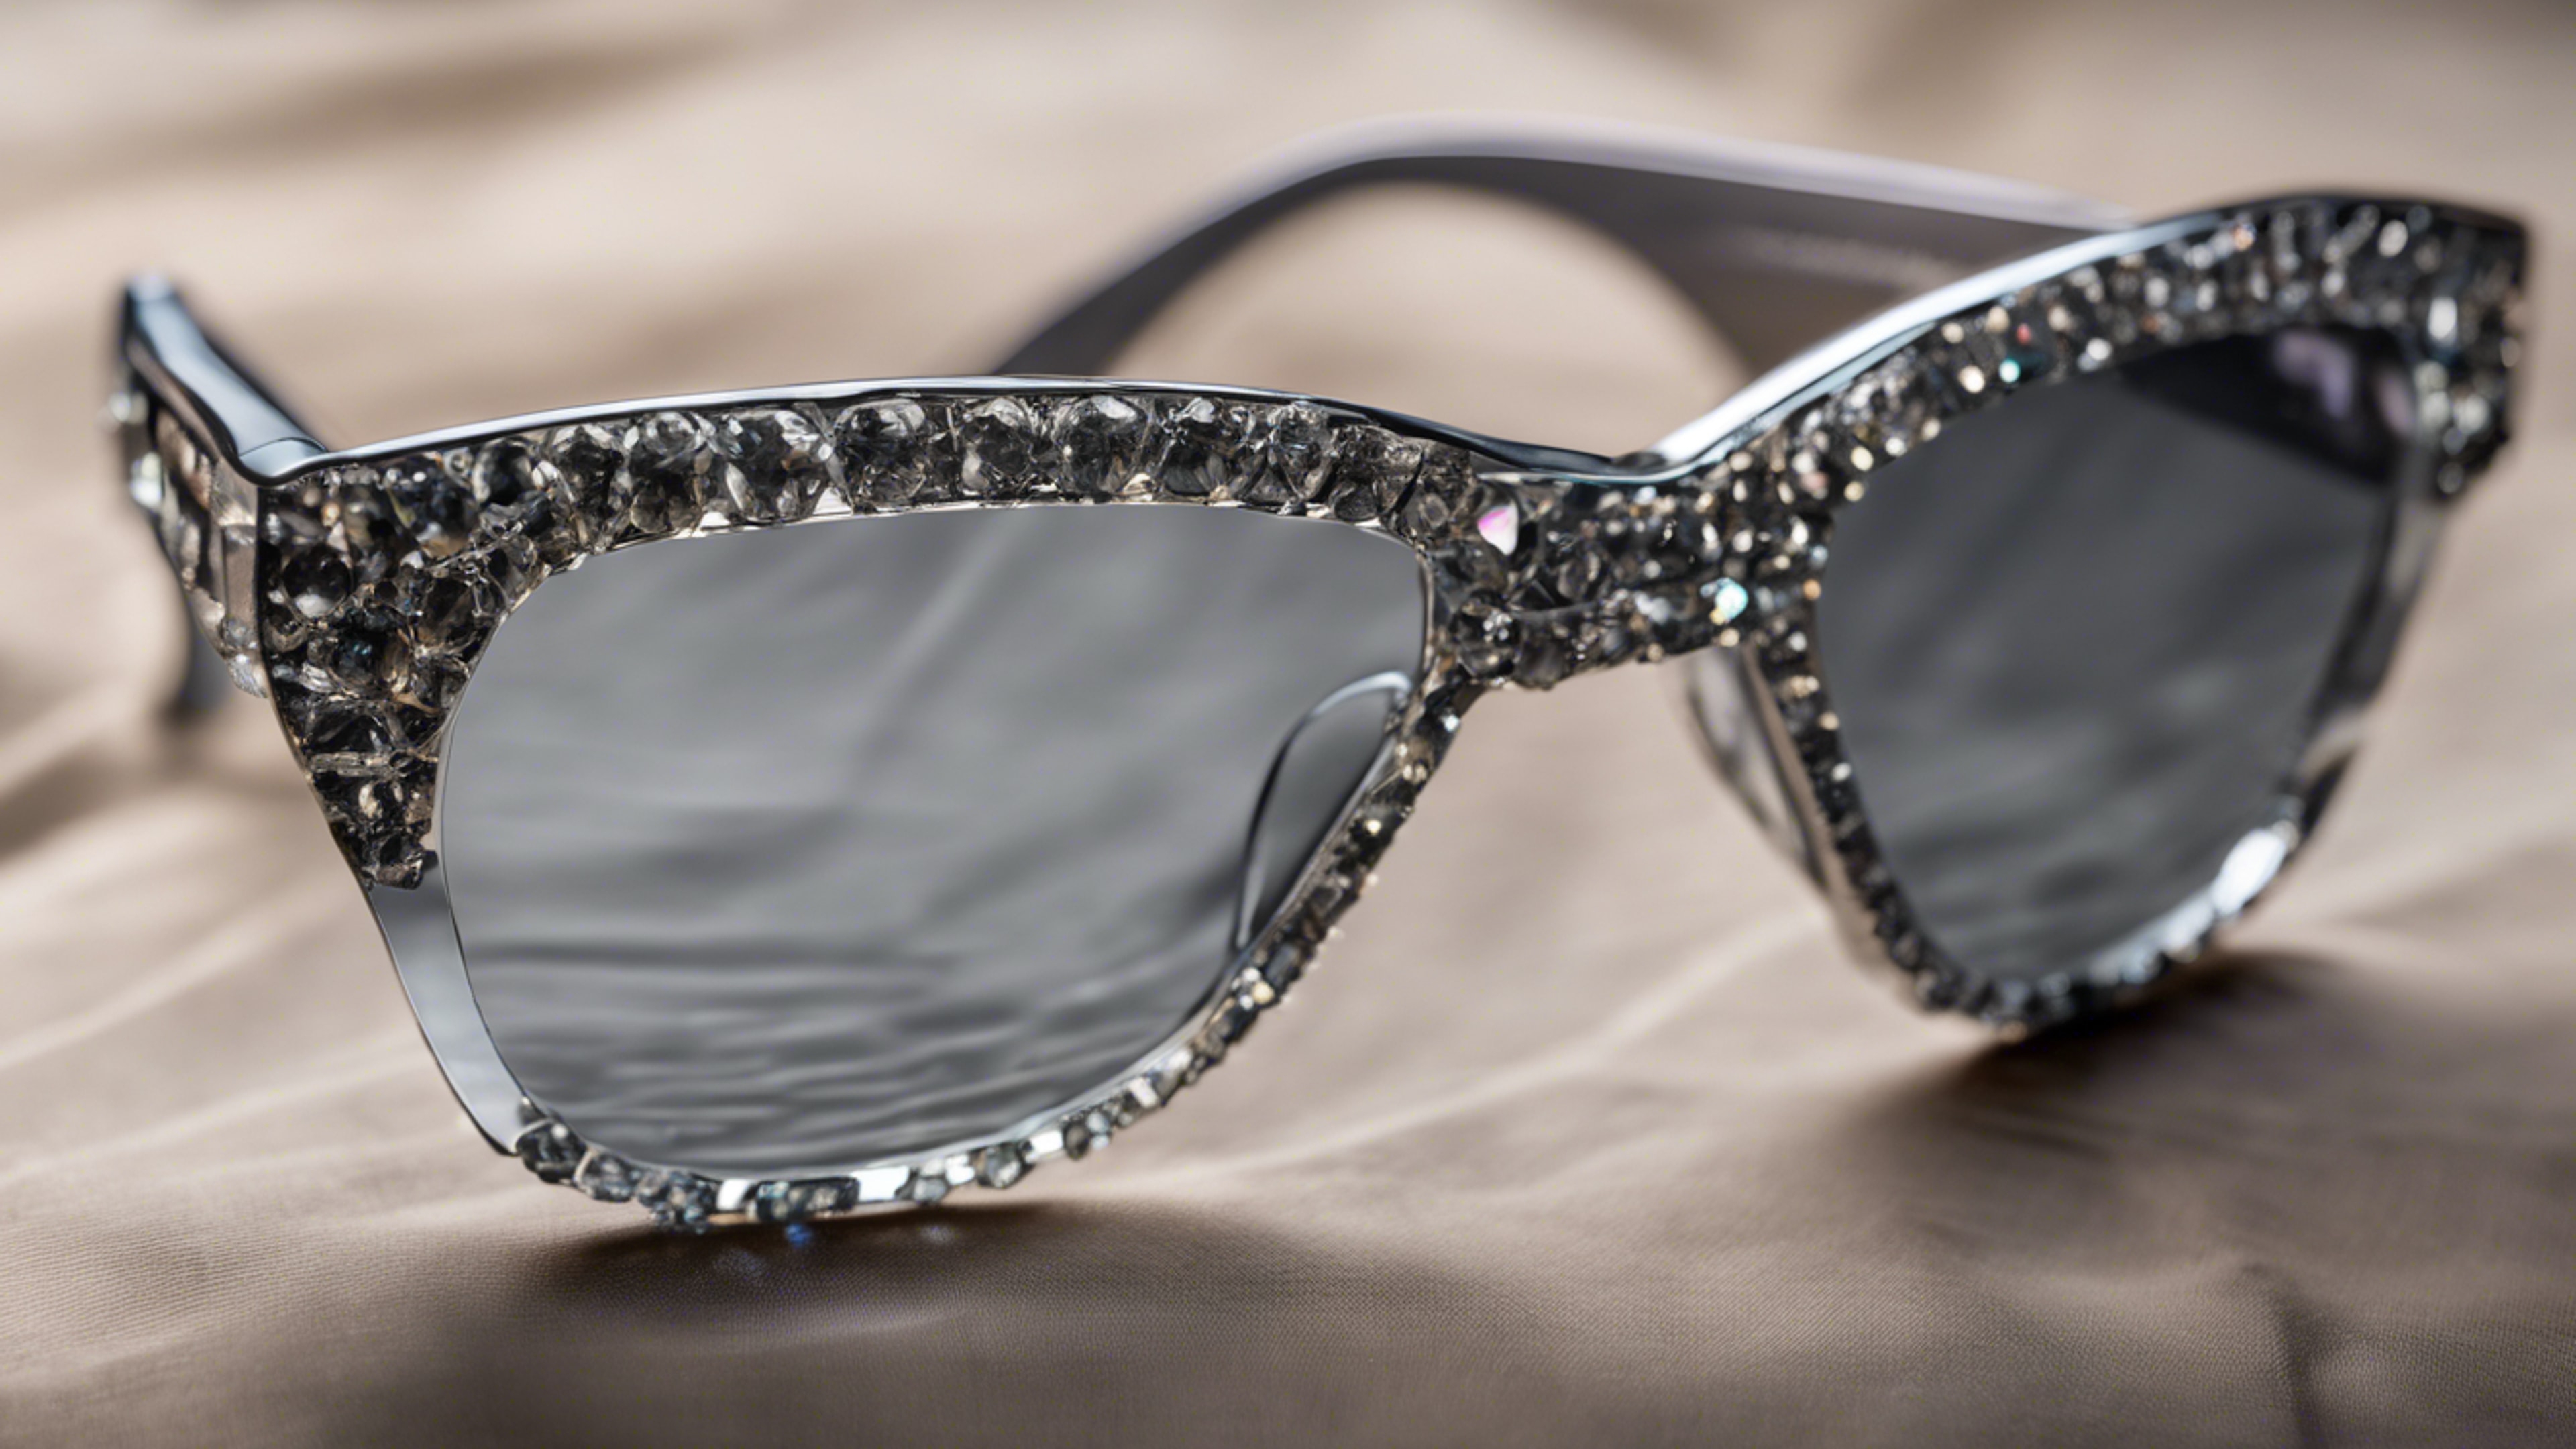 A pair of gray diamond encrusted glasses, epitomizing luxury and status. טפט[6d0b74d92658455f9dbd]